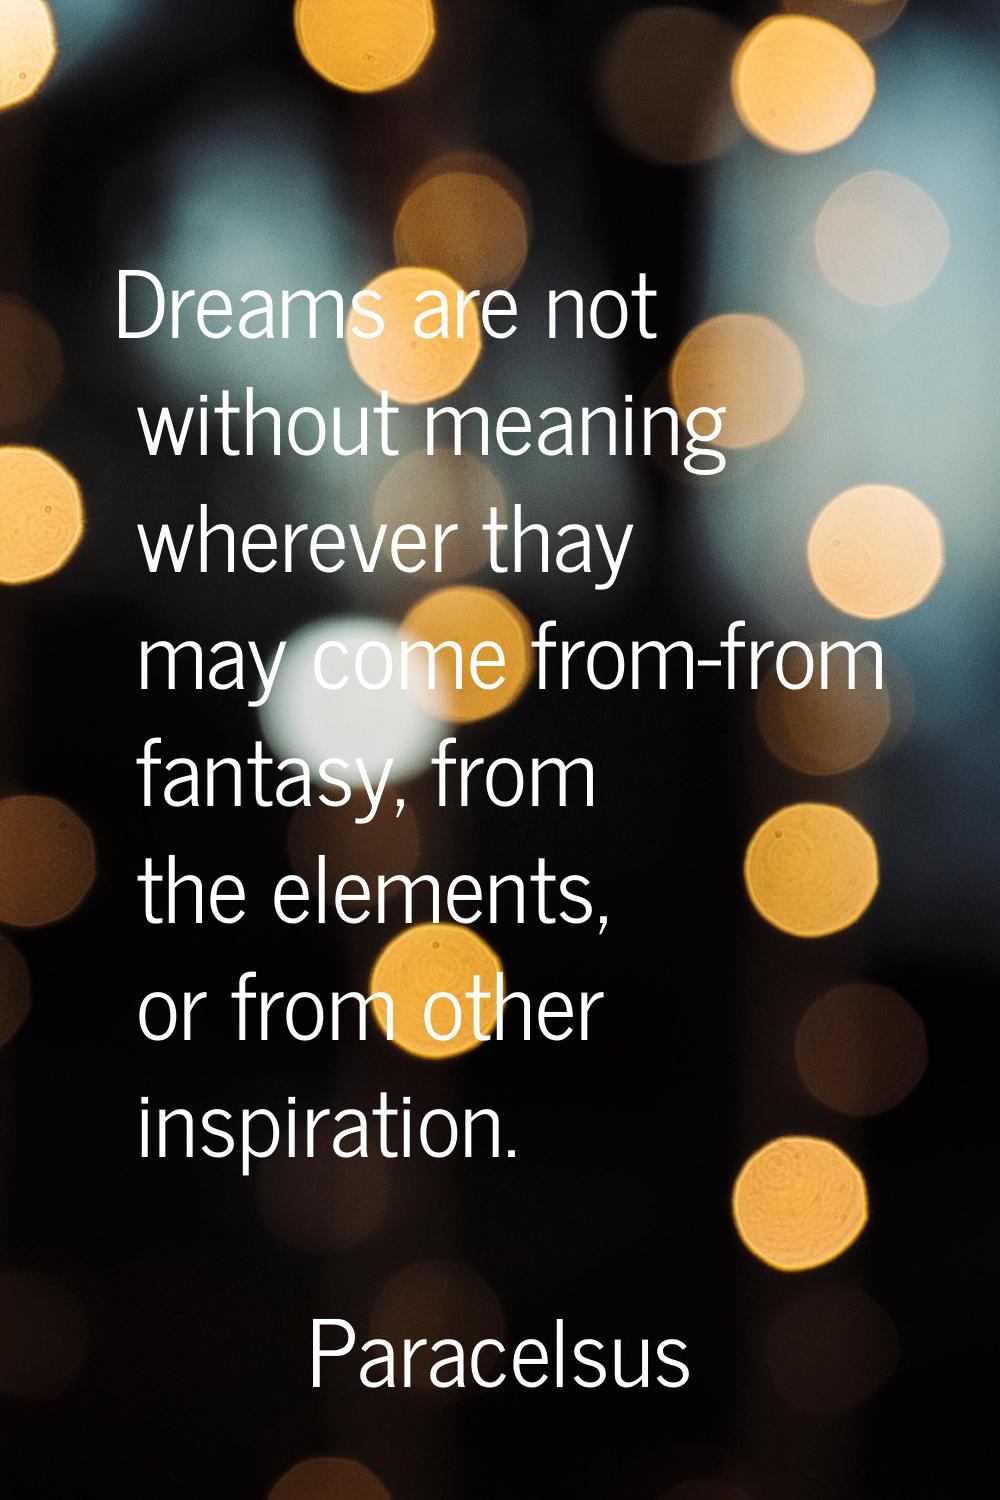 Dreams are not without meaning wherever thay may come from-from fantasy, from the elements, or from